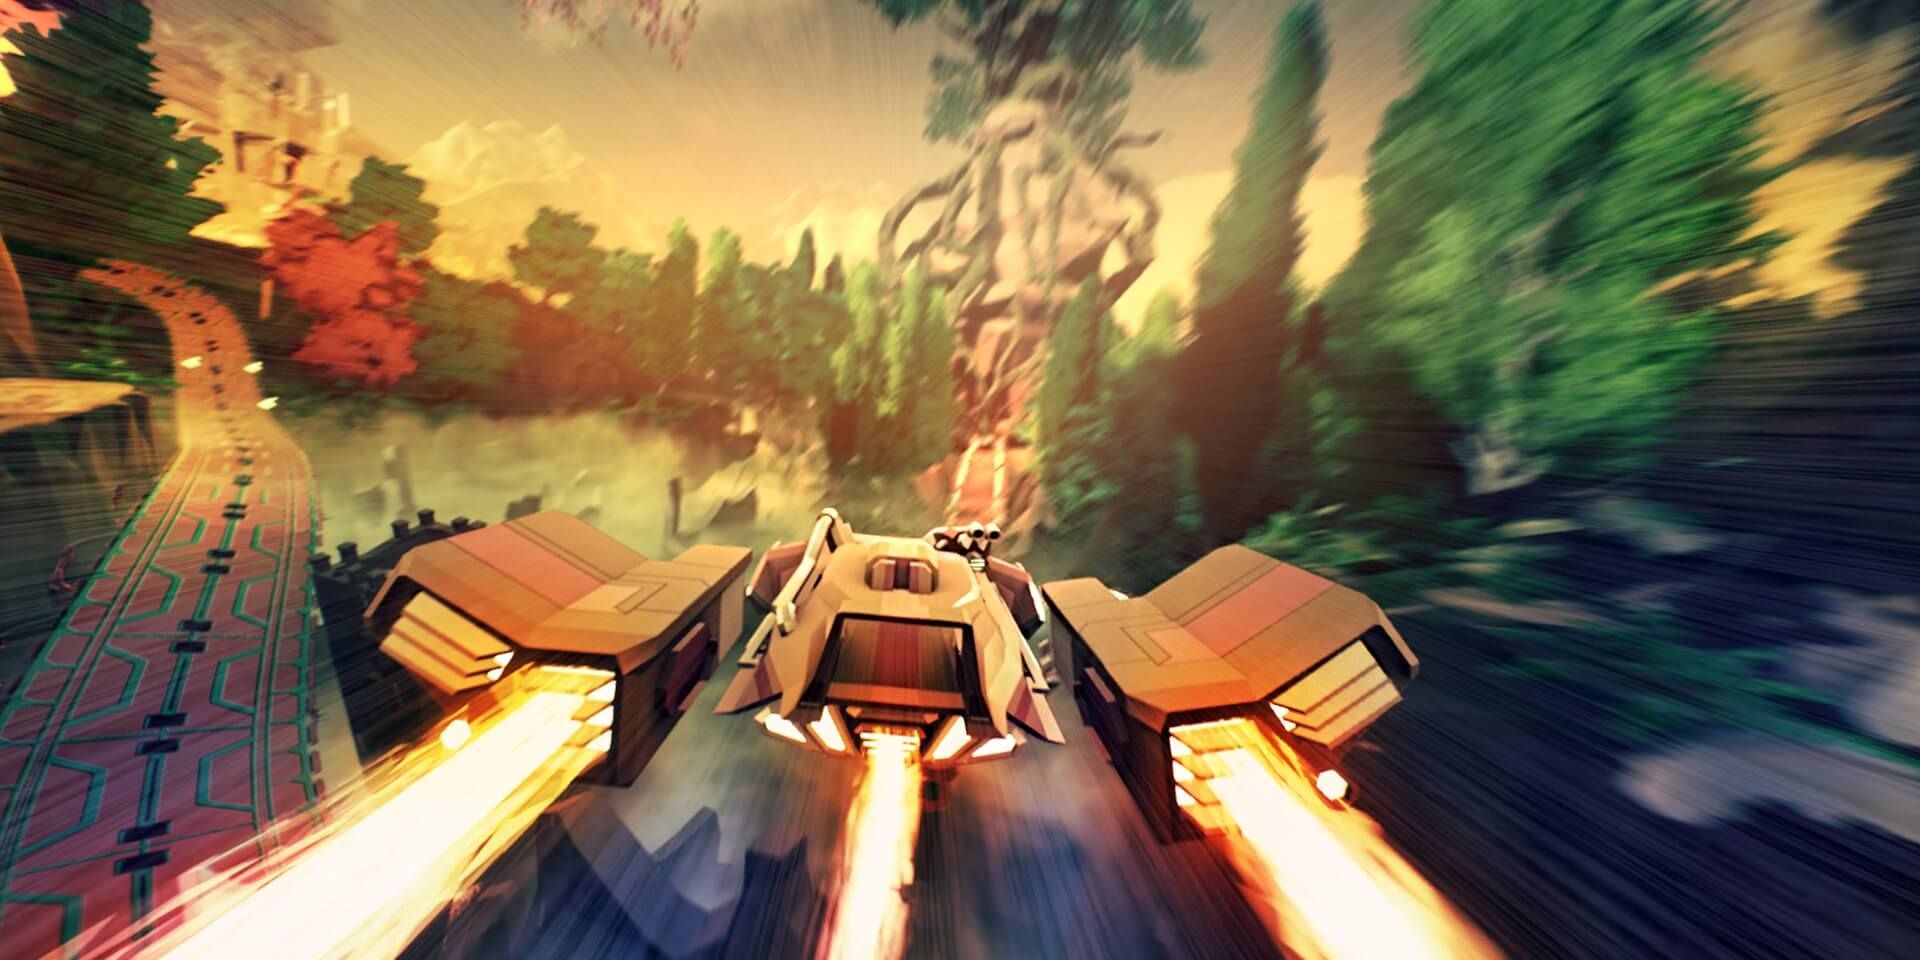 Redout scenery with racer blazing through a track